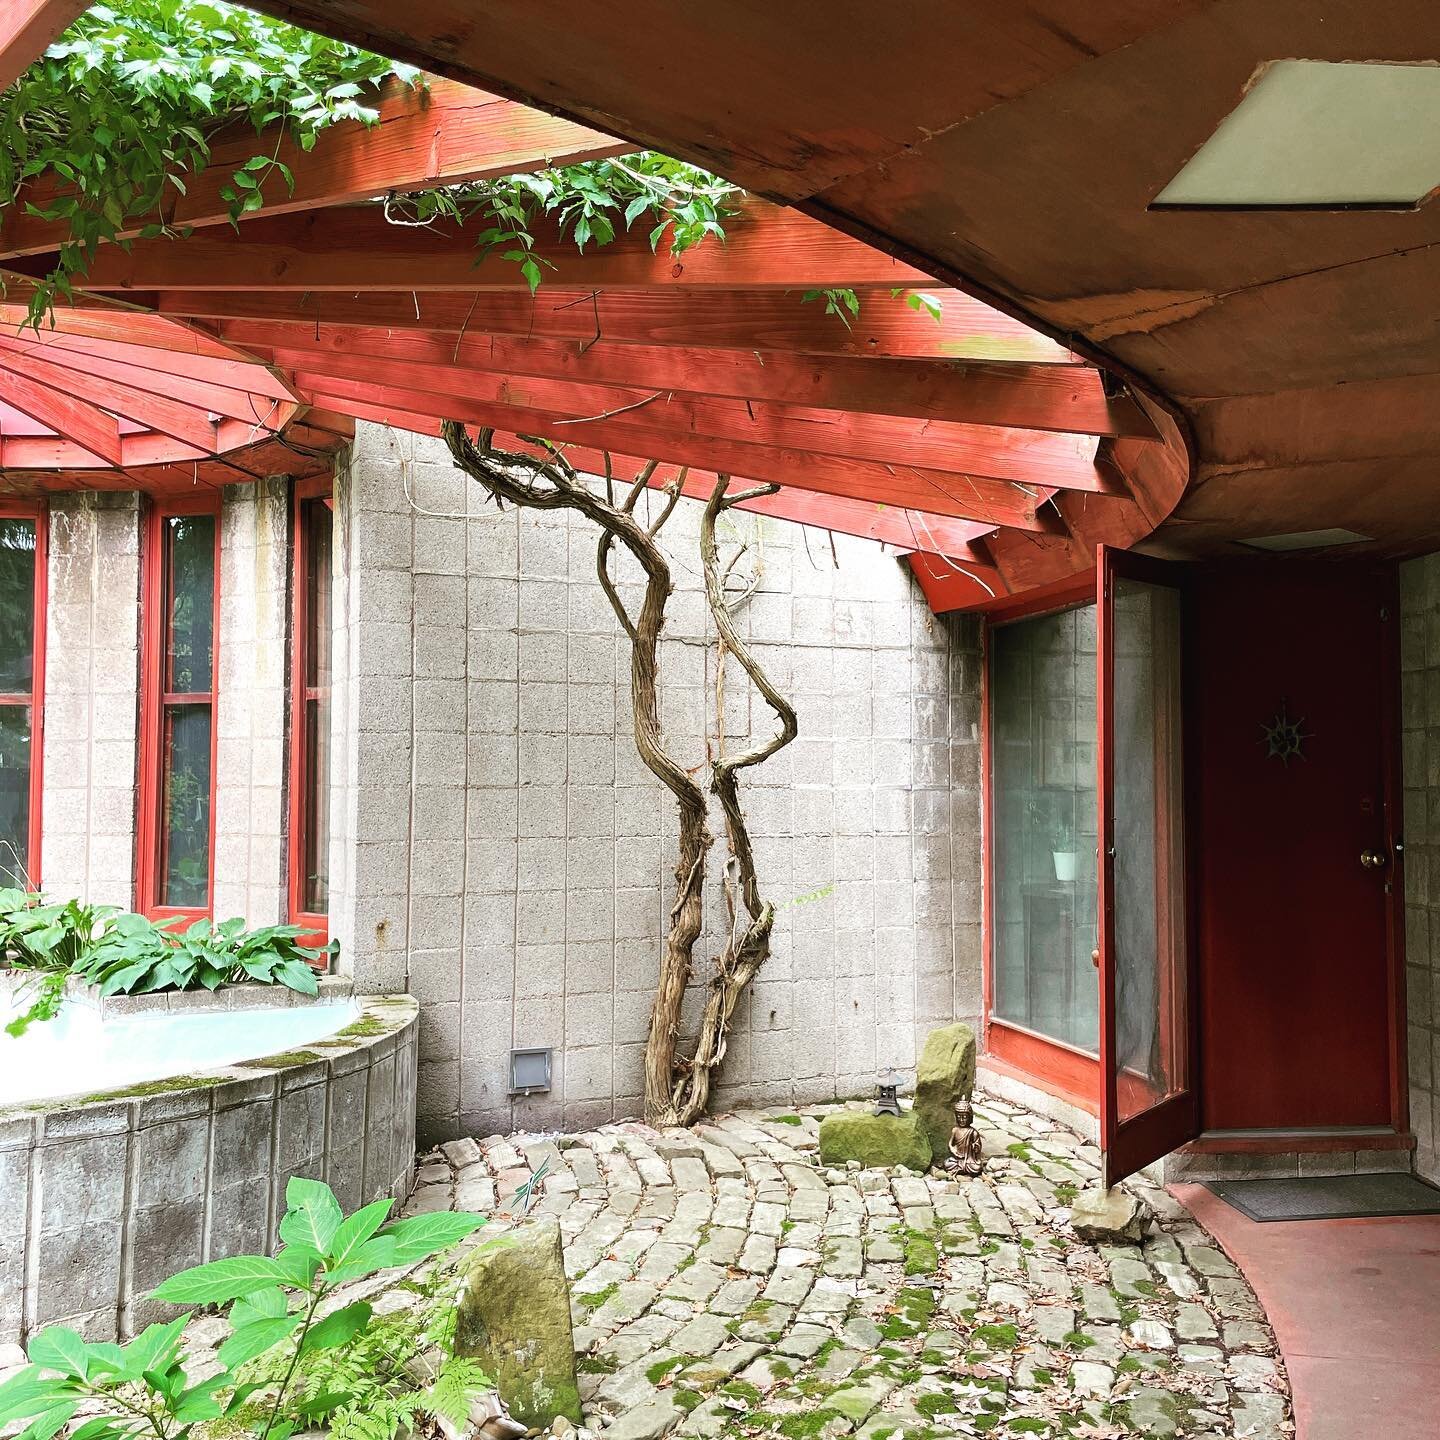 🍁OCT 13-15 📣
LIVING MODERN: A @pittsburghmoderncommittee weekend exploring modernist homes &amp; interiors with related archives - highlighting projects by Wrightian architects Cornelia Brierly and Peter Berndtson.

🗂️Friday 10/13: The program kic